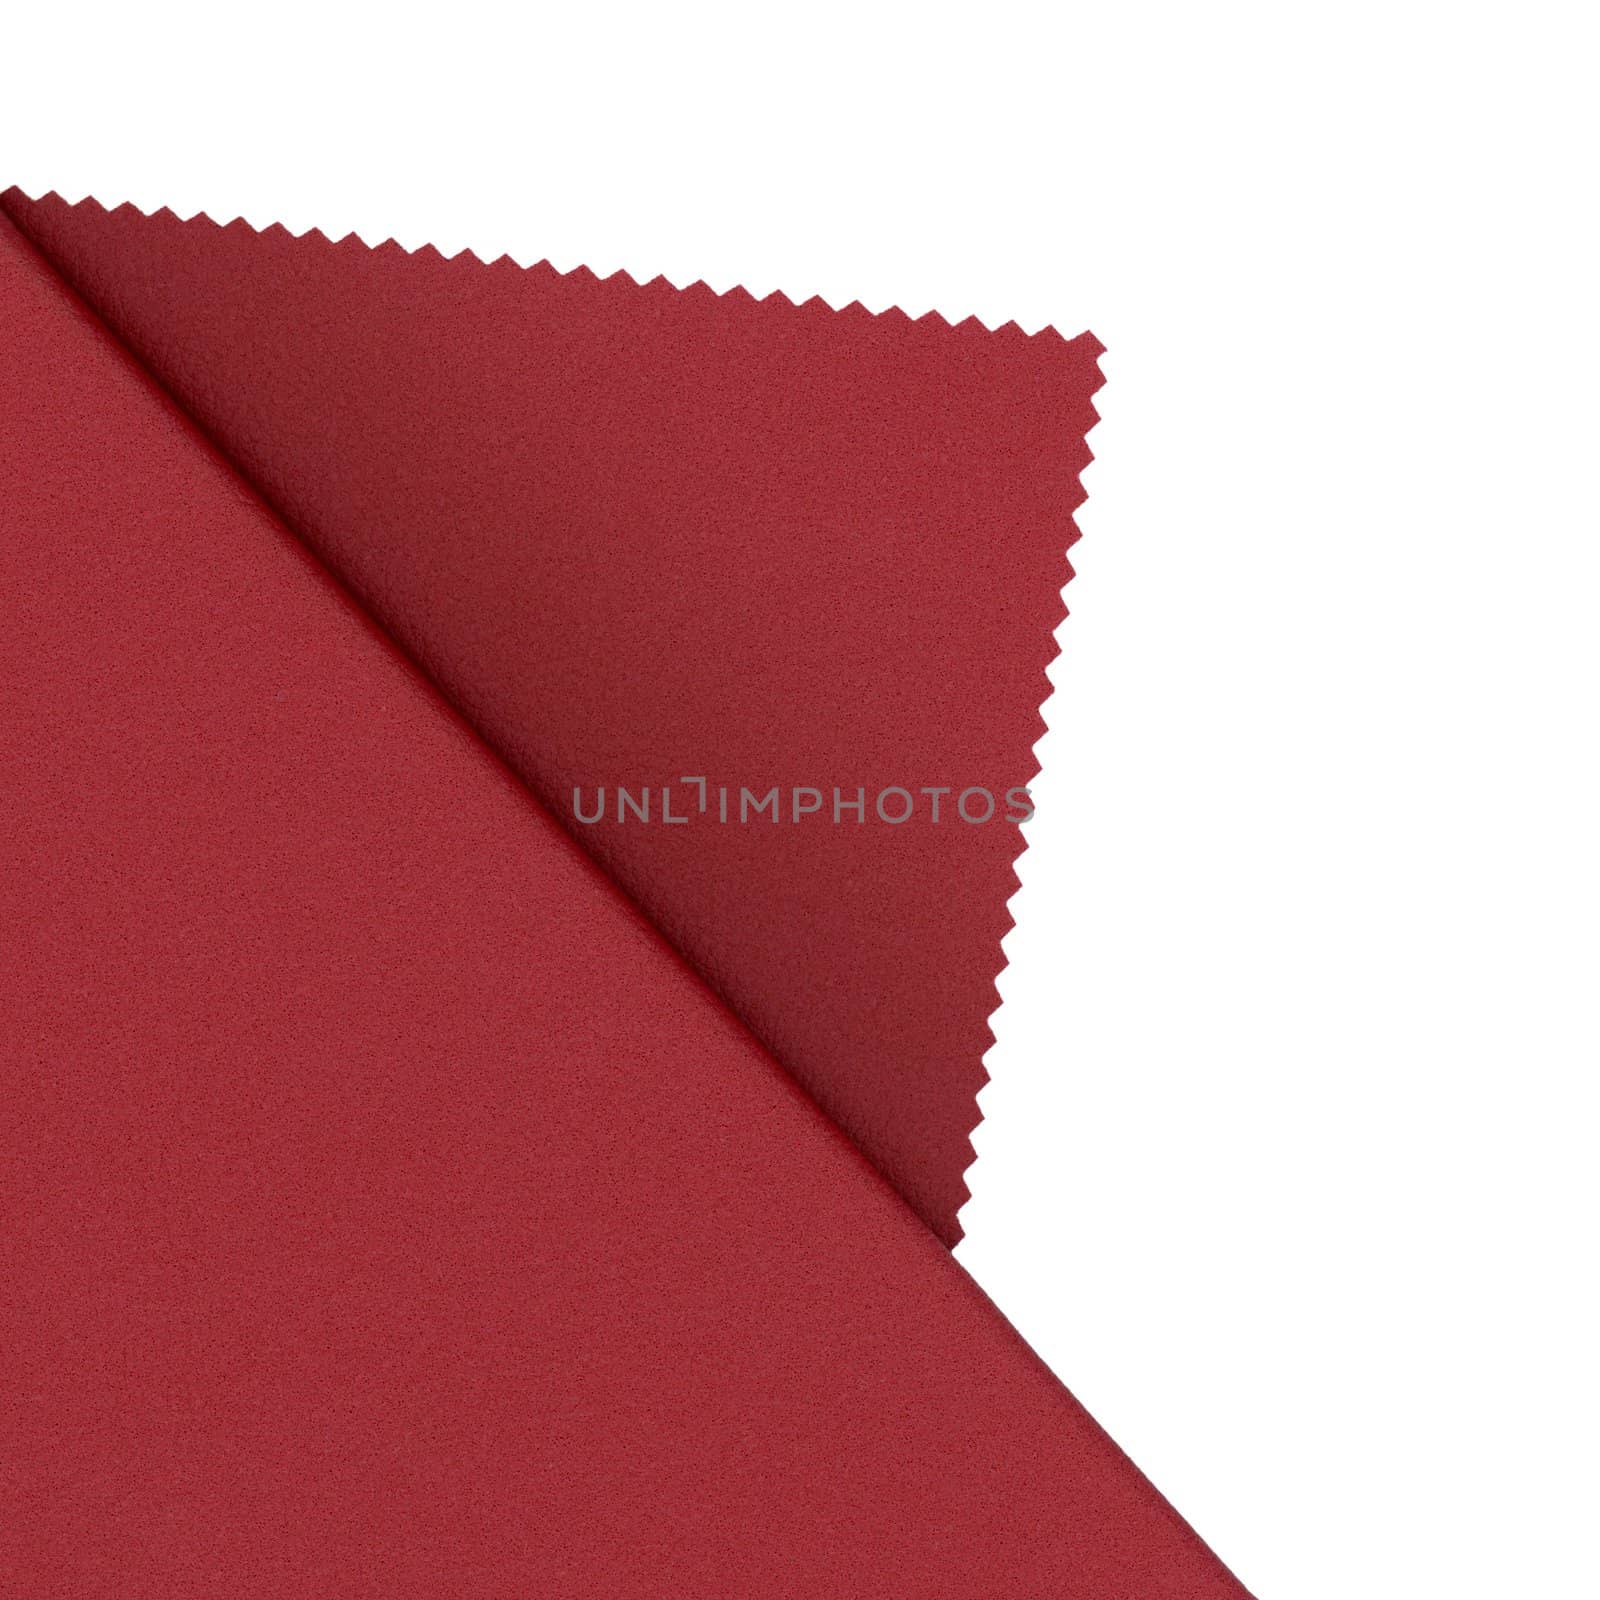 red leatherette faux leather sample by claudiodivizia